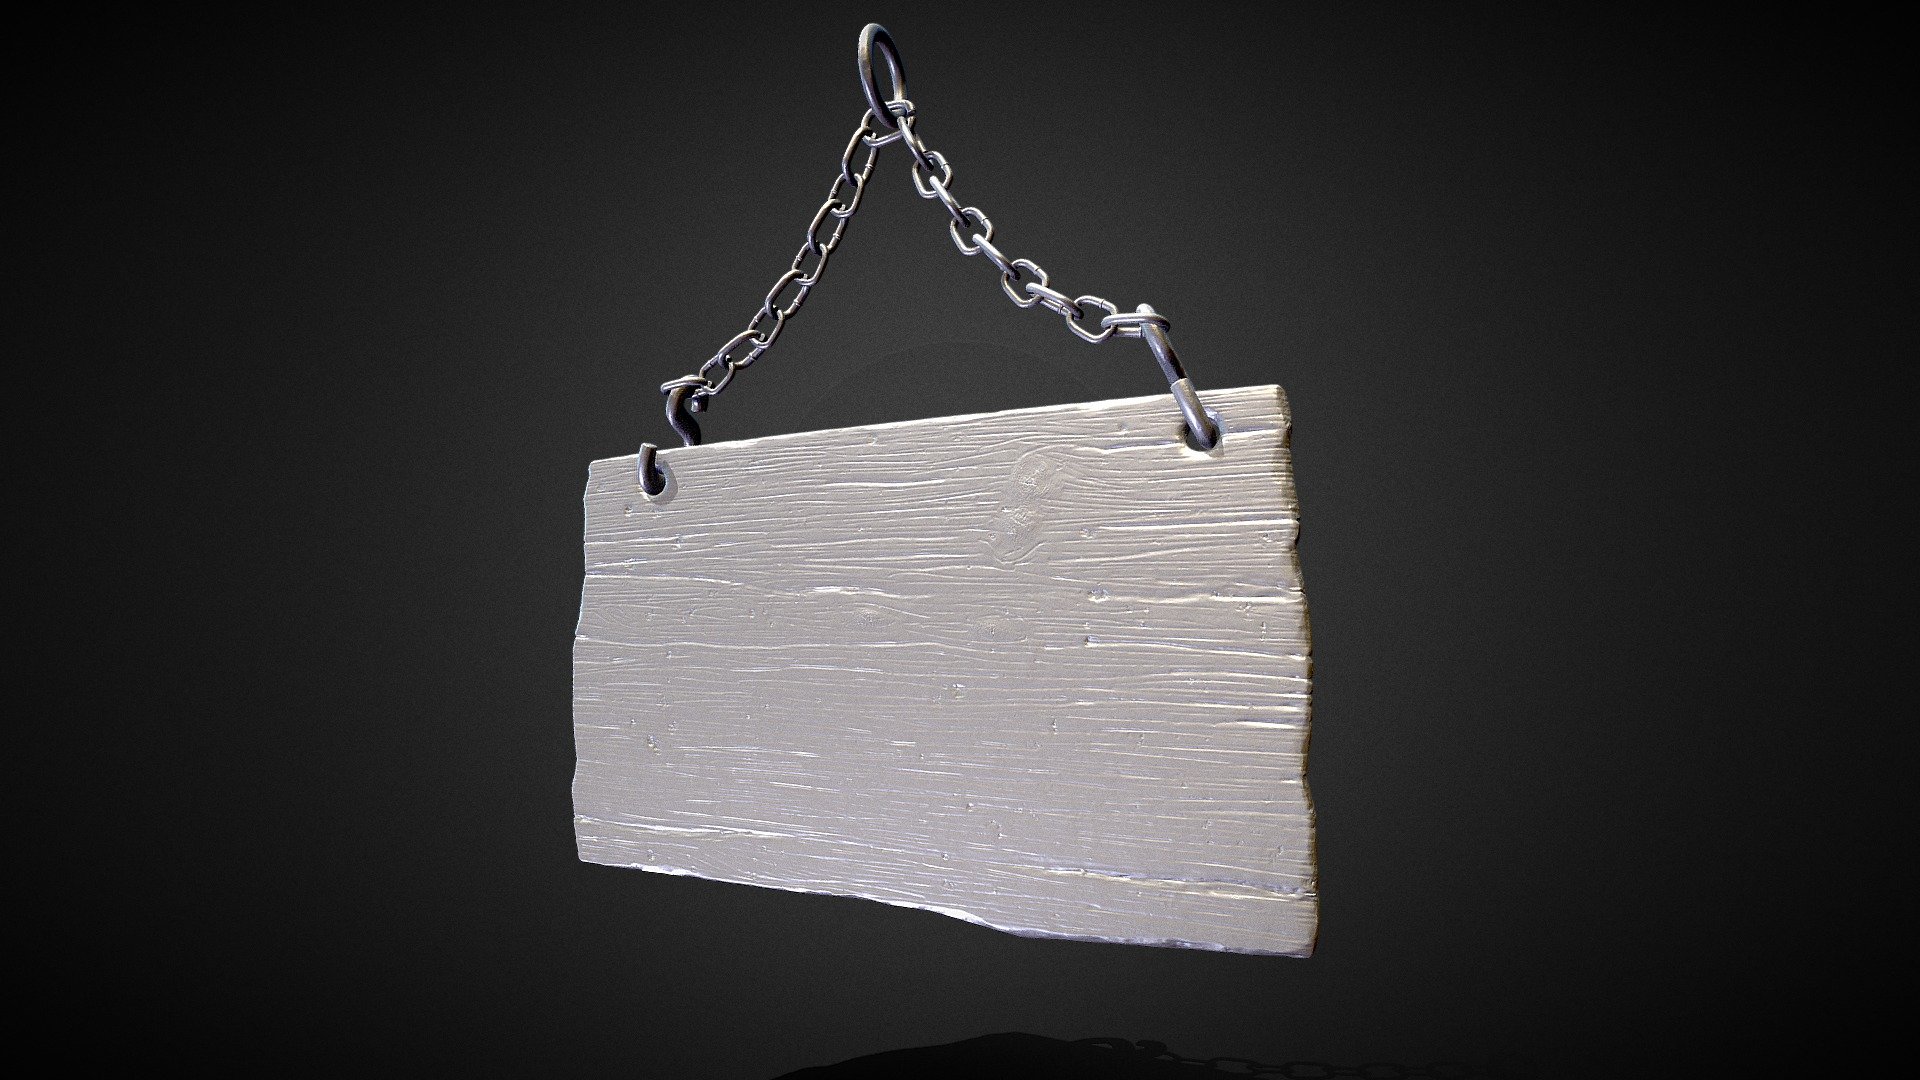 3D High-Poly Wooden Sign with Chains! An excellent asset for 3D Environment Artist to extract high-poly details for textures maps and game assets! Makes a great hero piece and landmark for your 3D project!

Features:
* Additional Zbrush Work File, with all sub-tools for further editing for additional detail
* Unique Wooden Sign design!

An excellent 3D asset for 3D game development or your personal project!
Purchase Today! - 3D Wooden Sign With Chains - High Poly - Buy Royalty Free 3D model by Boney Toes (@boneytoes) 3d model